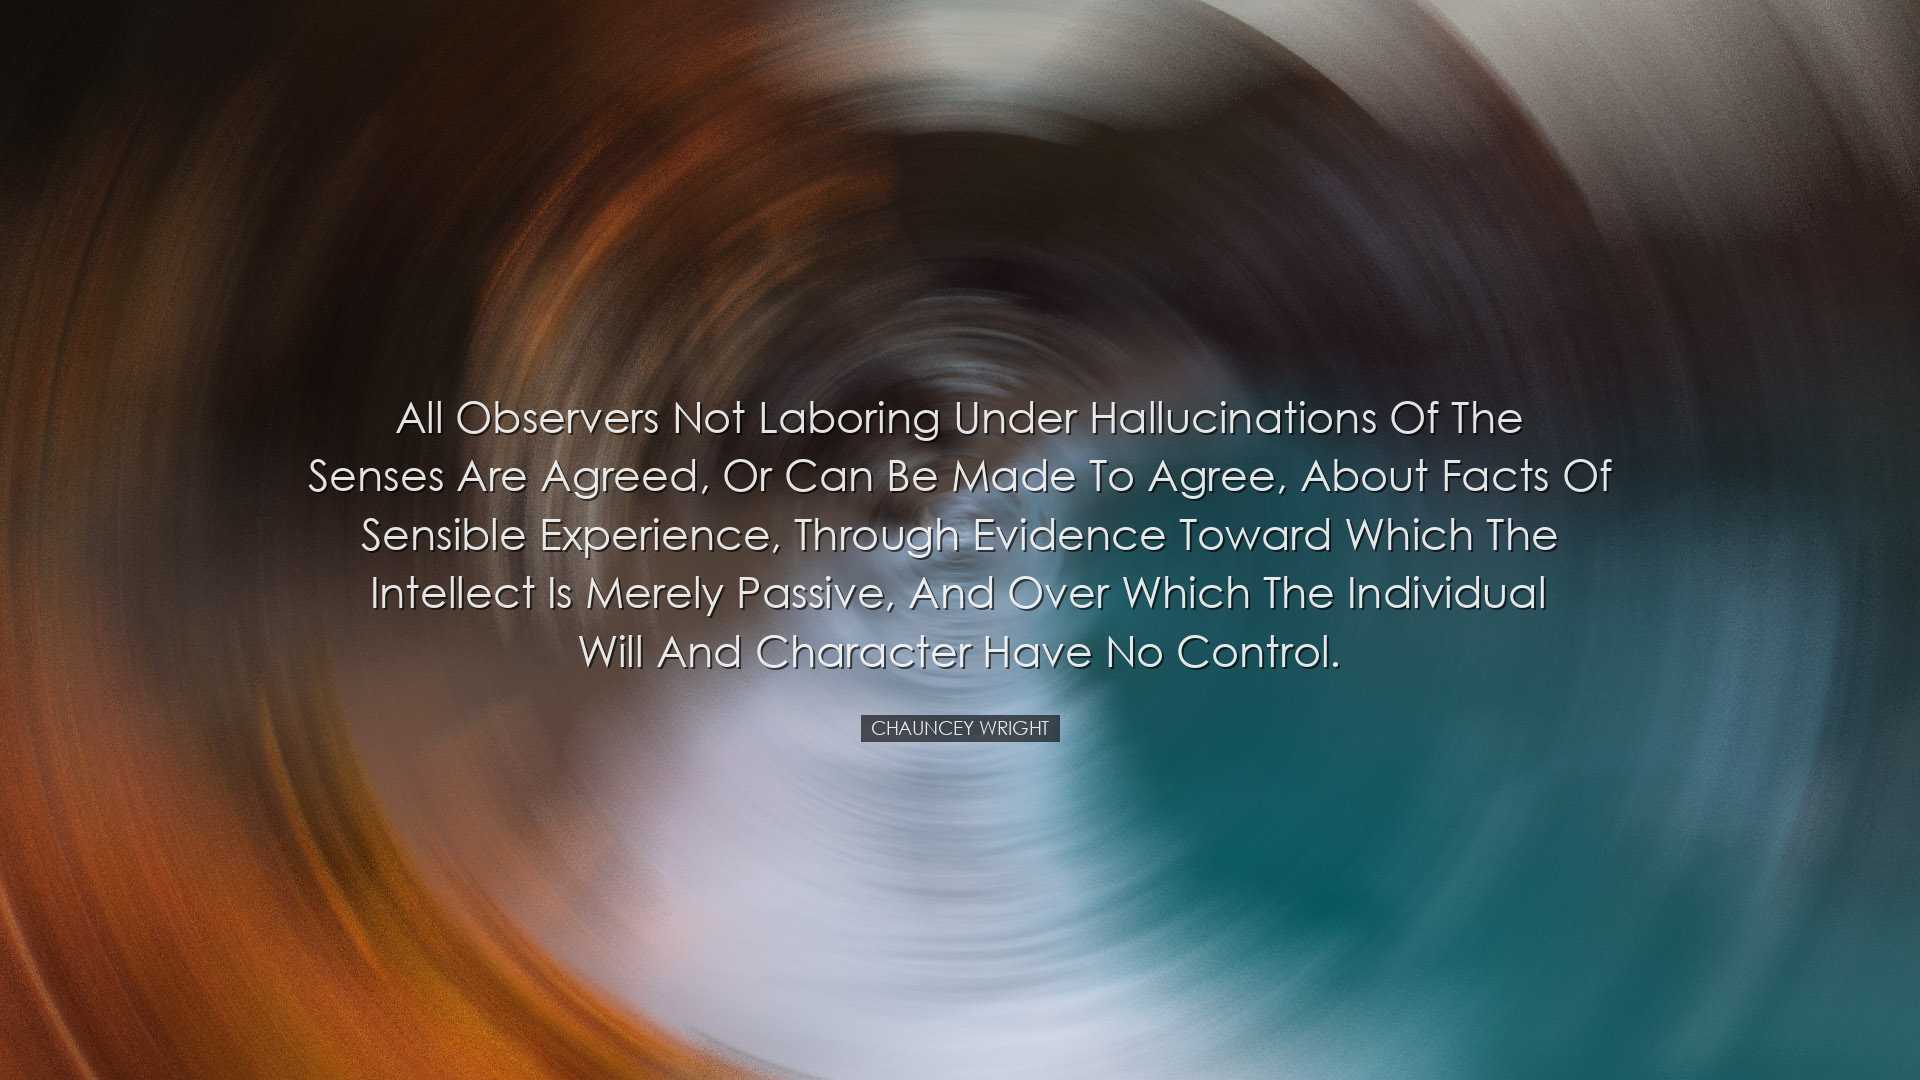 All observers not laboring under hallucinations of the senses are